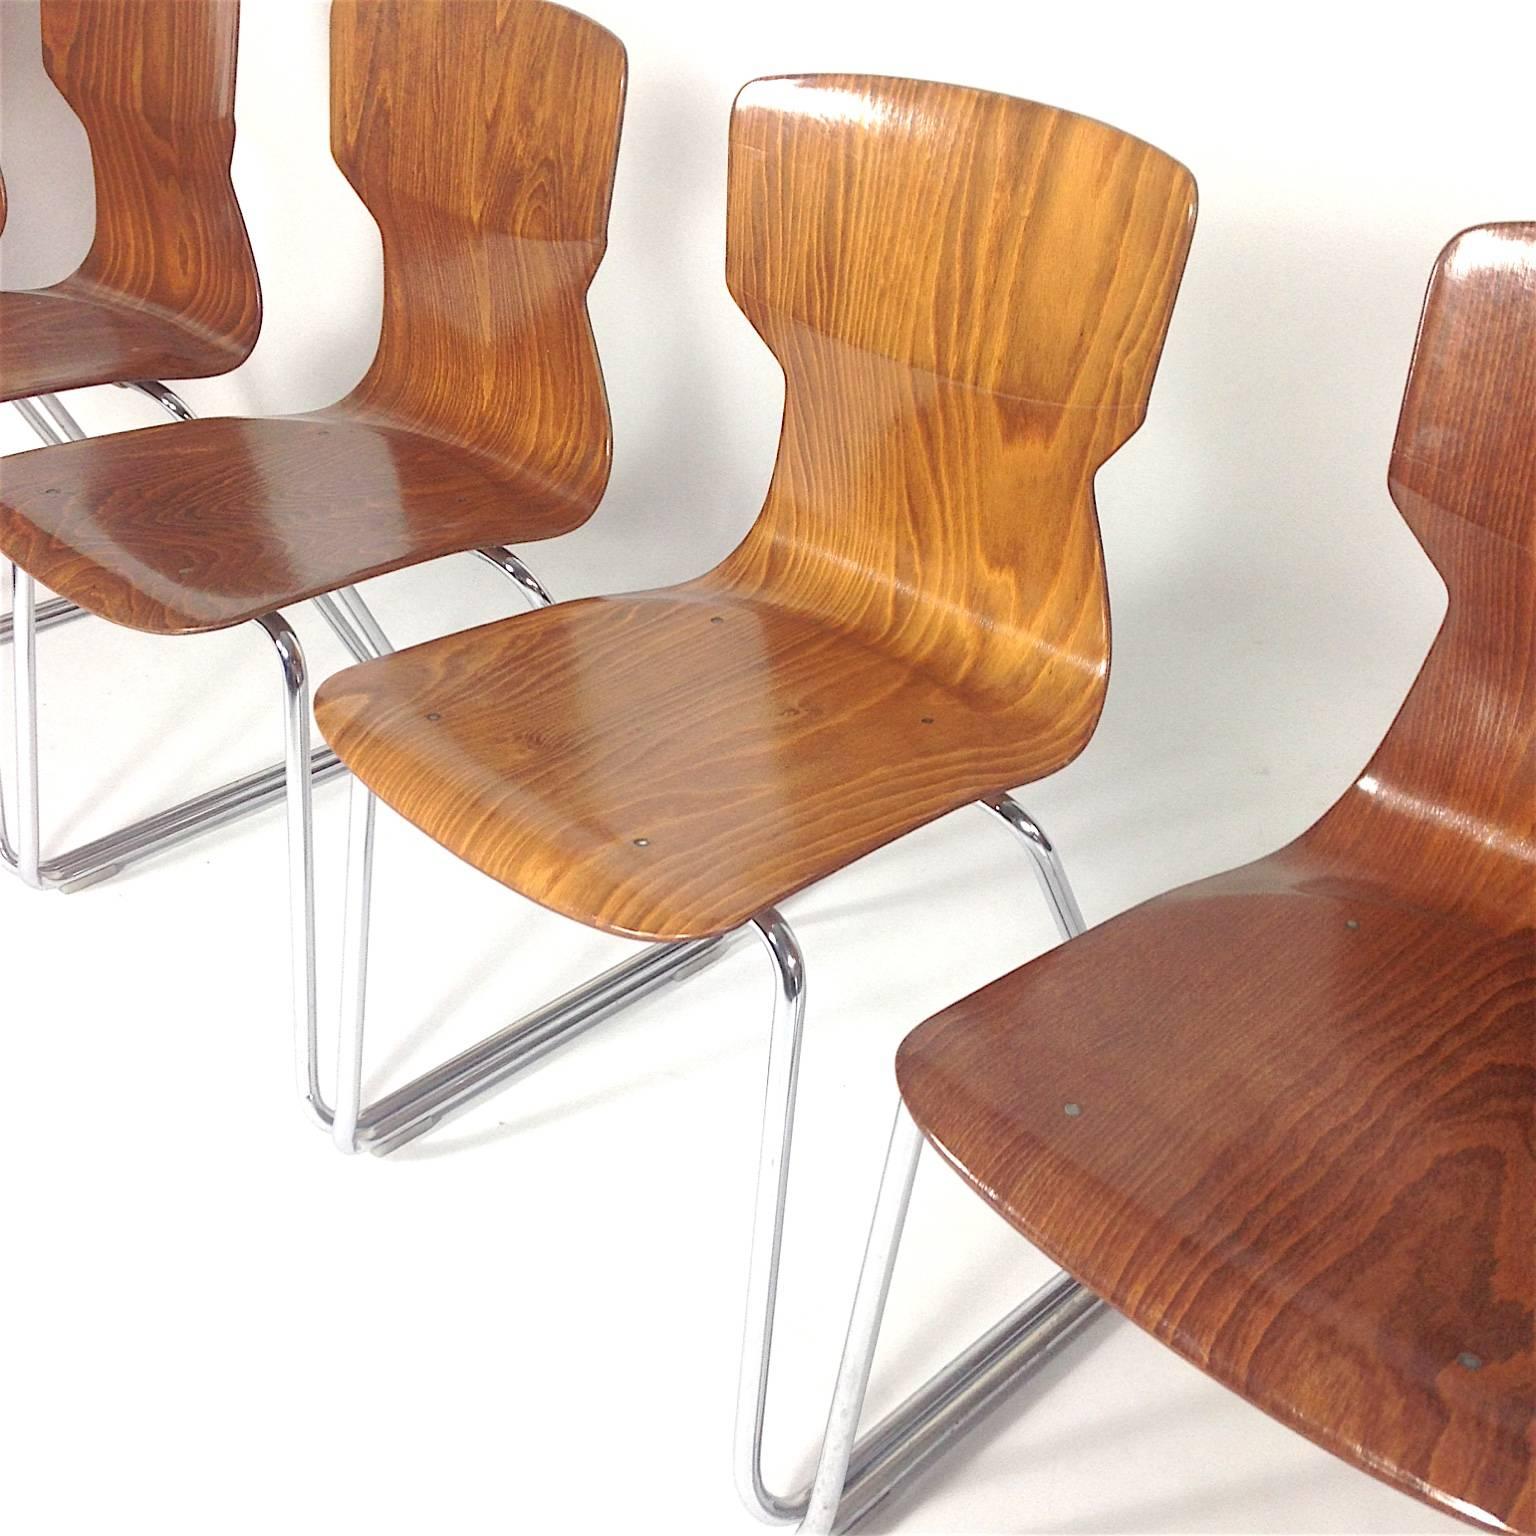 Cool industrial vintage school chairs with Beech plywood seats and chromed metal base.
Designer: Unknown. Probably Flötotto
Manufacturer: CASALA
Model: Stacking chair / School chair / Dining chair
Features: Chrome base with plywood